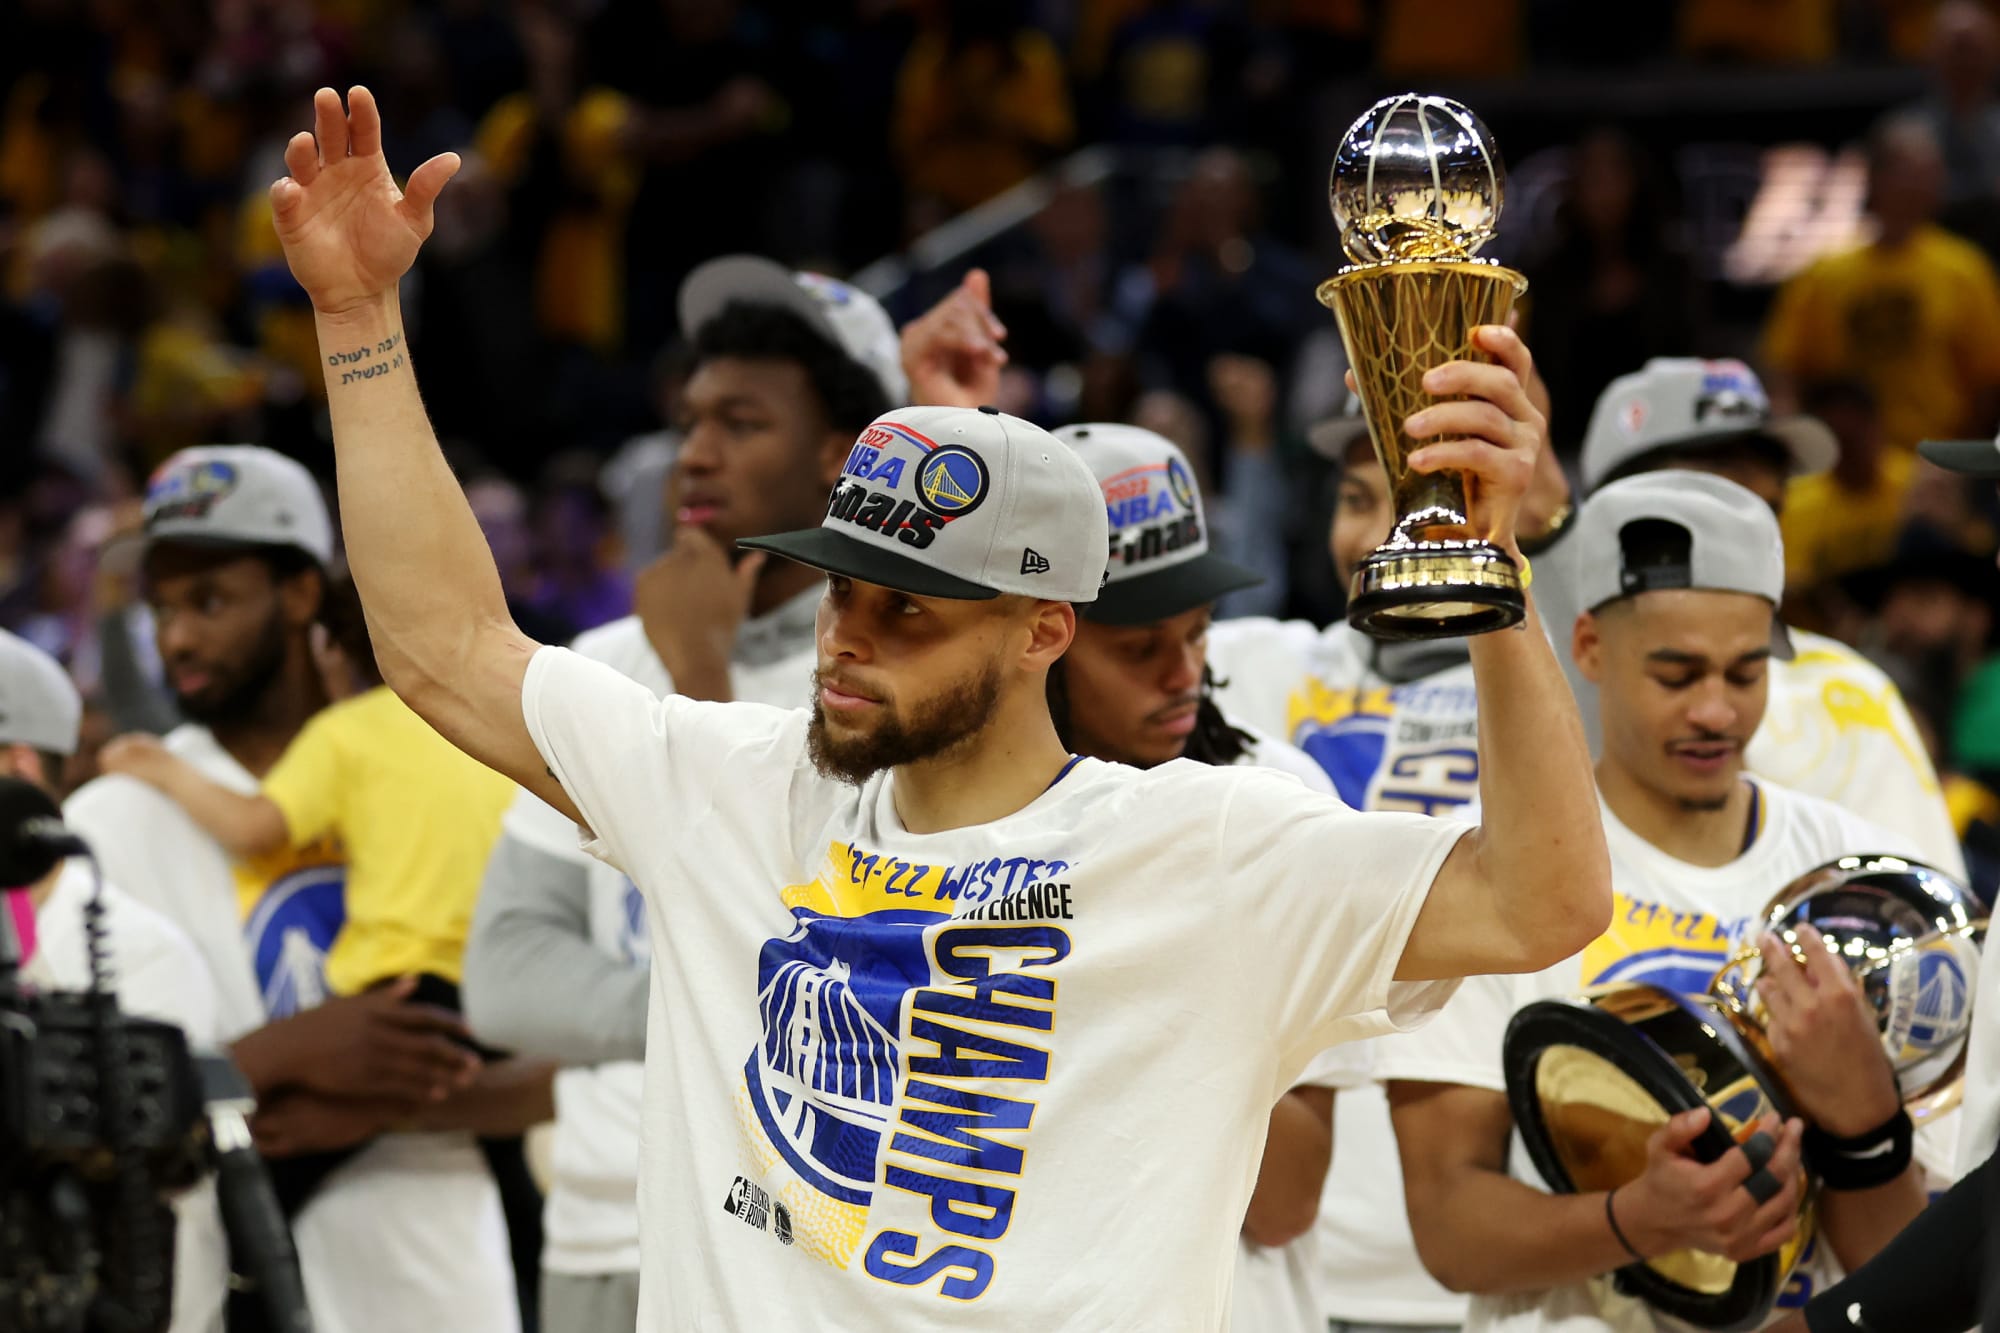 The Warriors have an amazing enjoy benefit within the NBA Finals